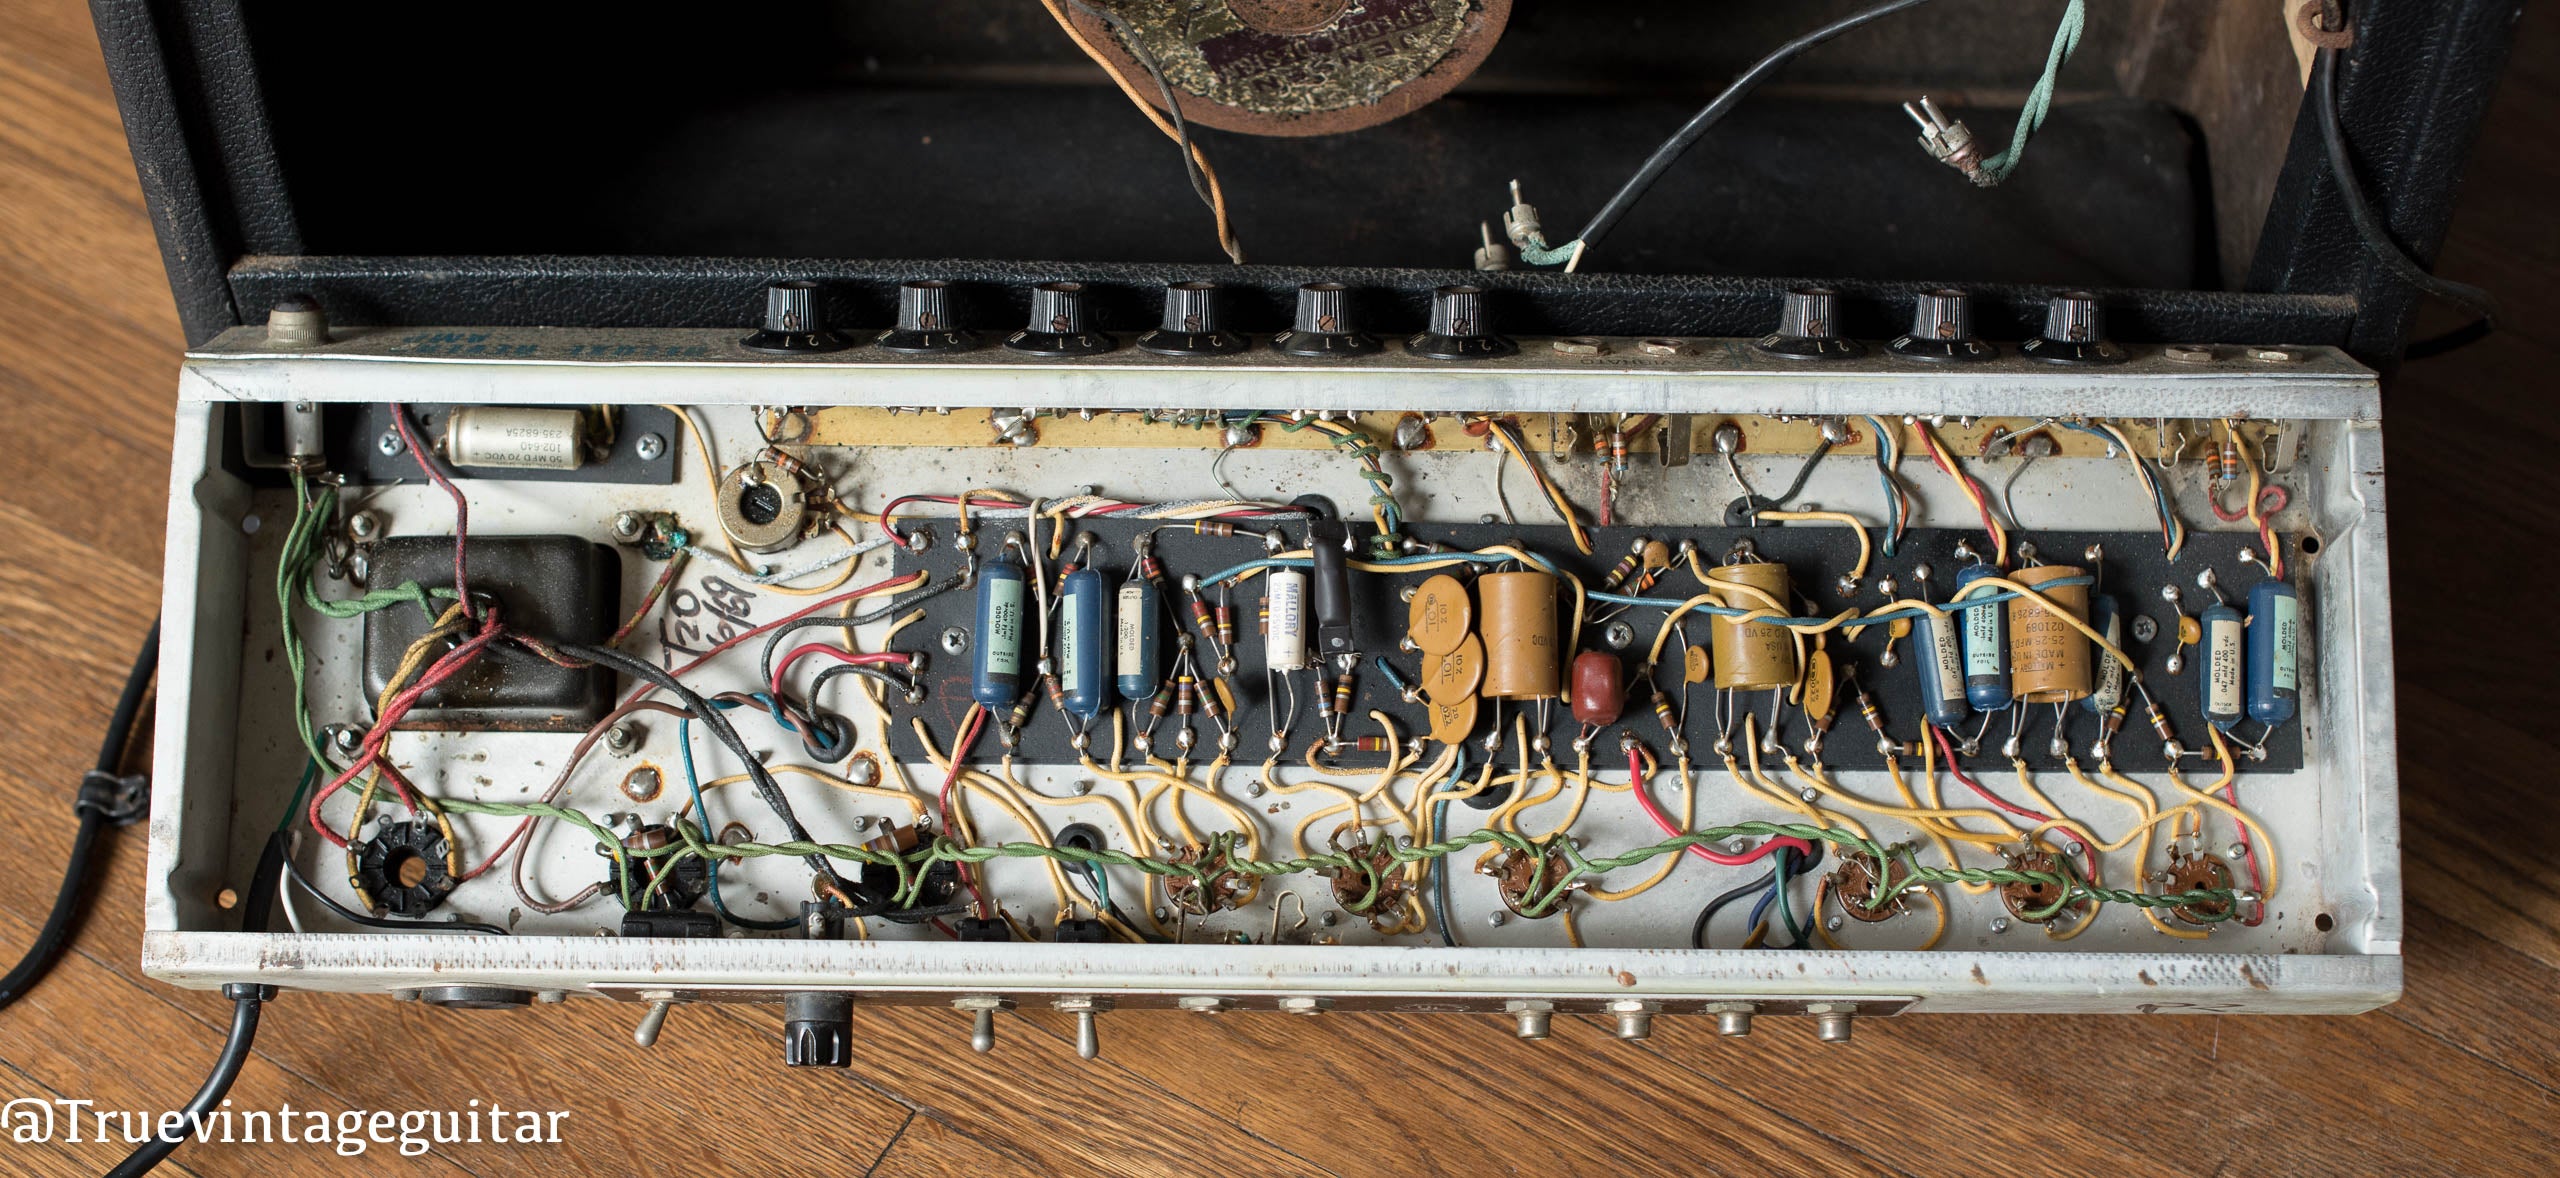 1969 Fender Deluxe Reverb Amp, inside chassis, circuit, cloth wiring